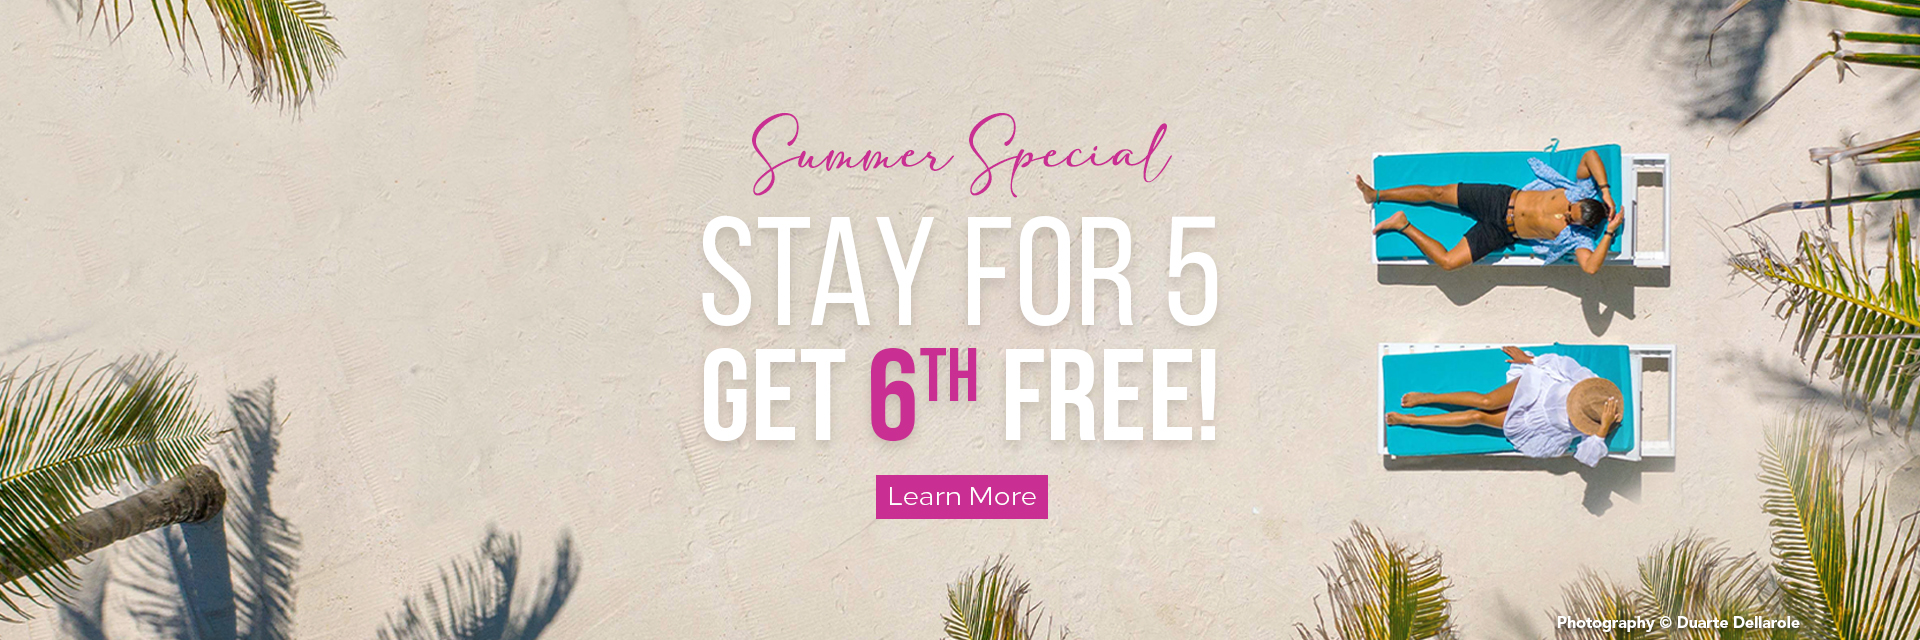 Summer Special - Stay for 5 & Get 6th Free